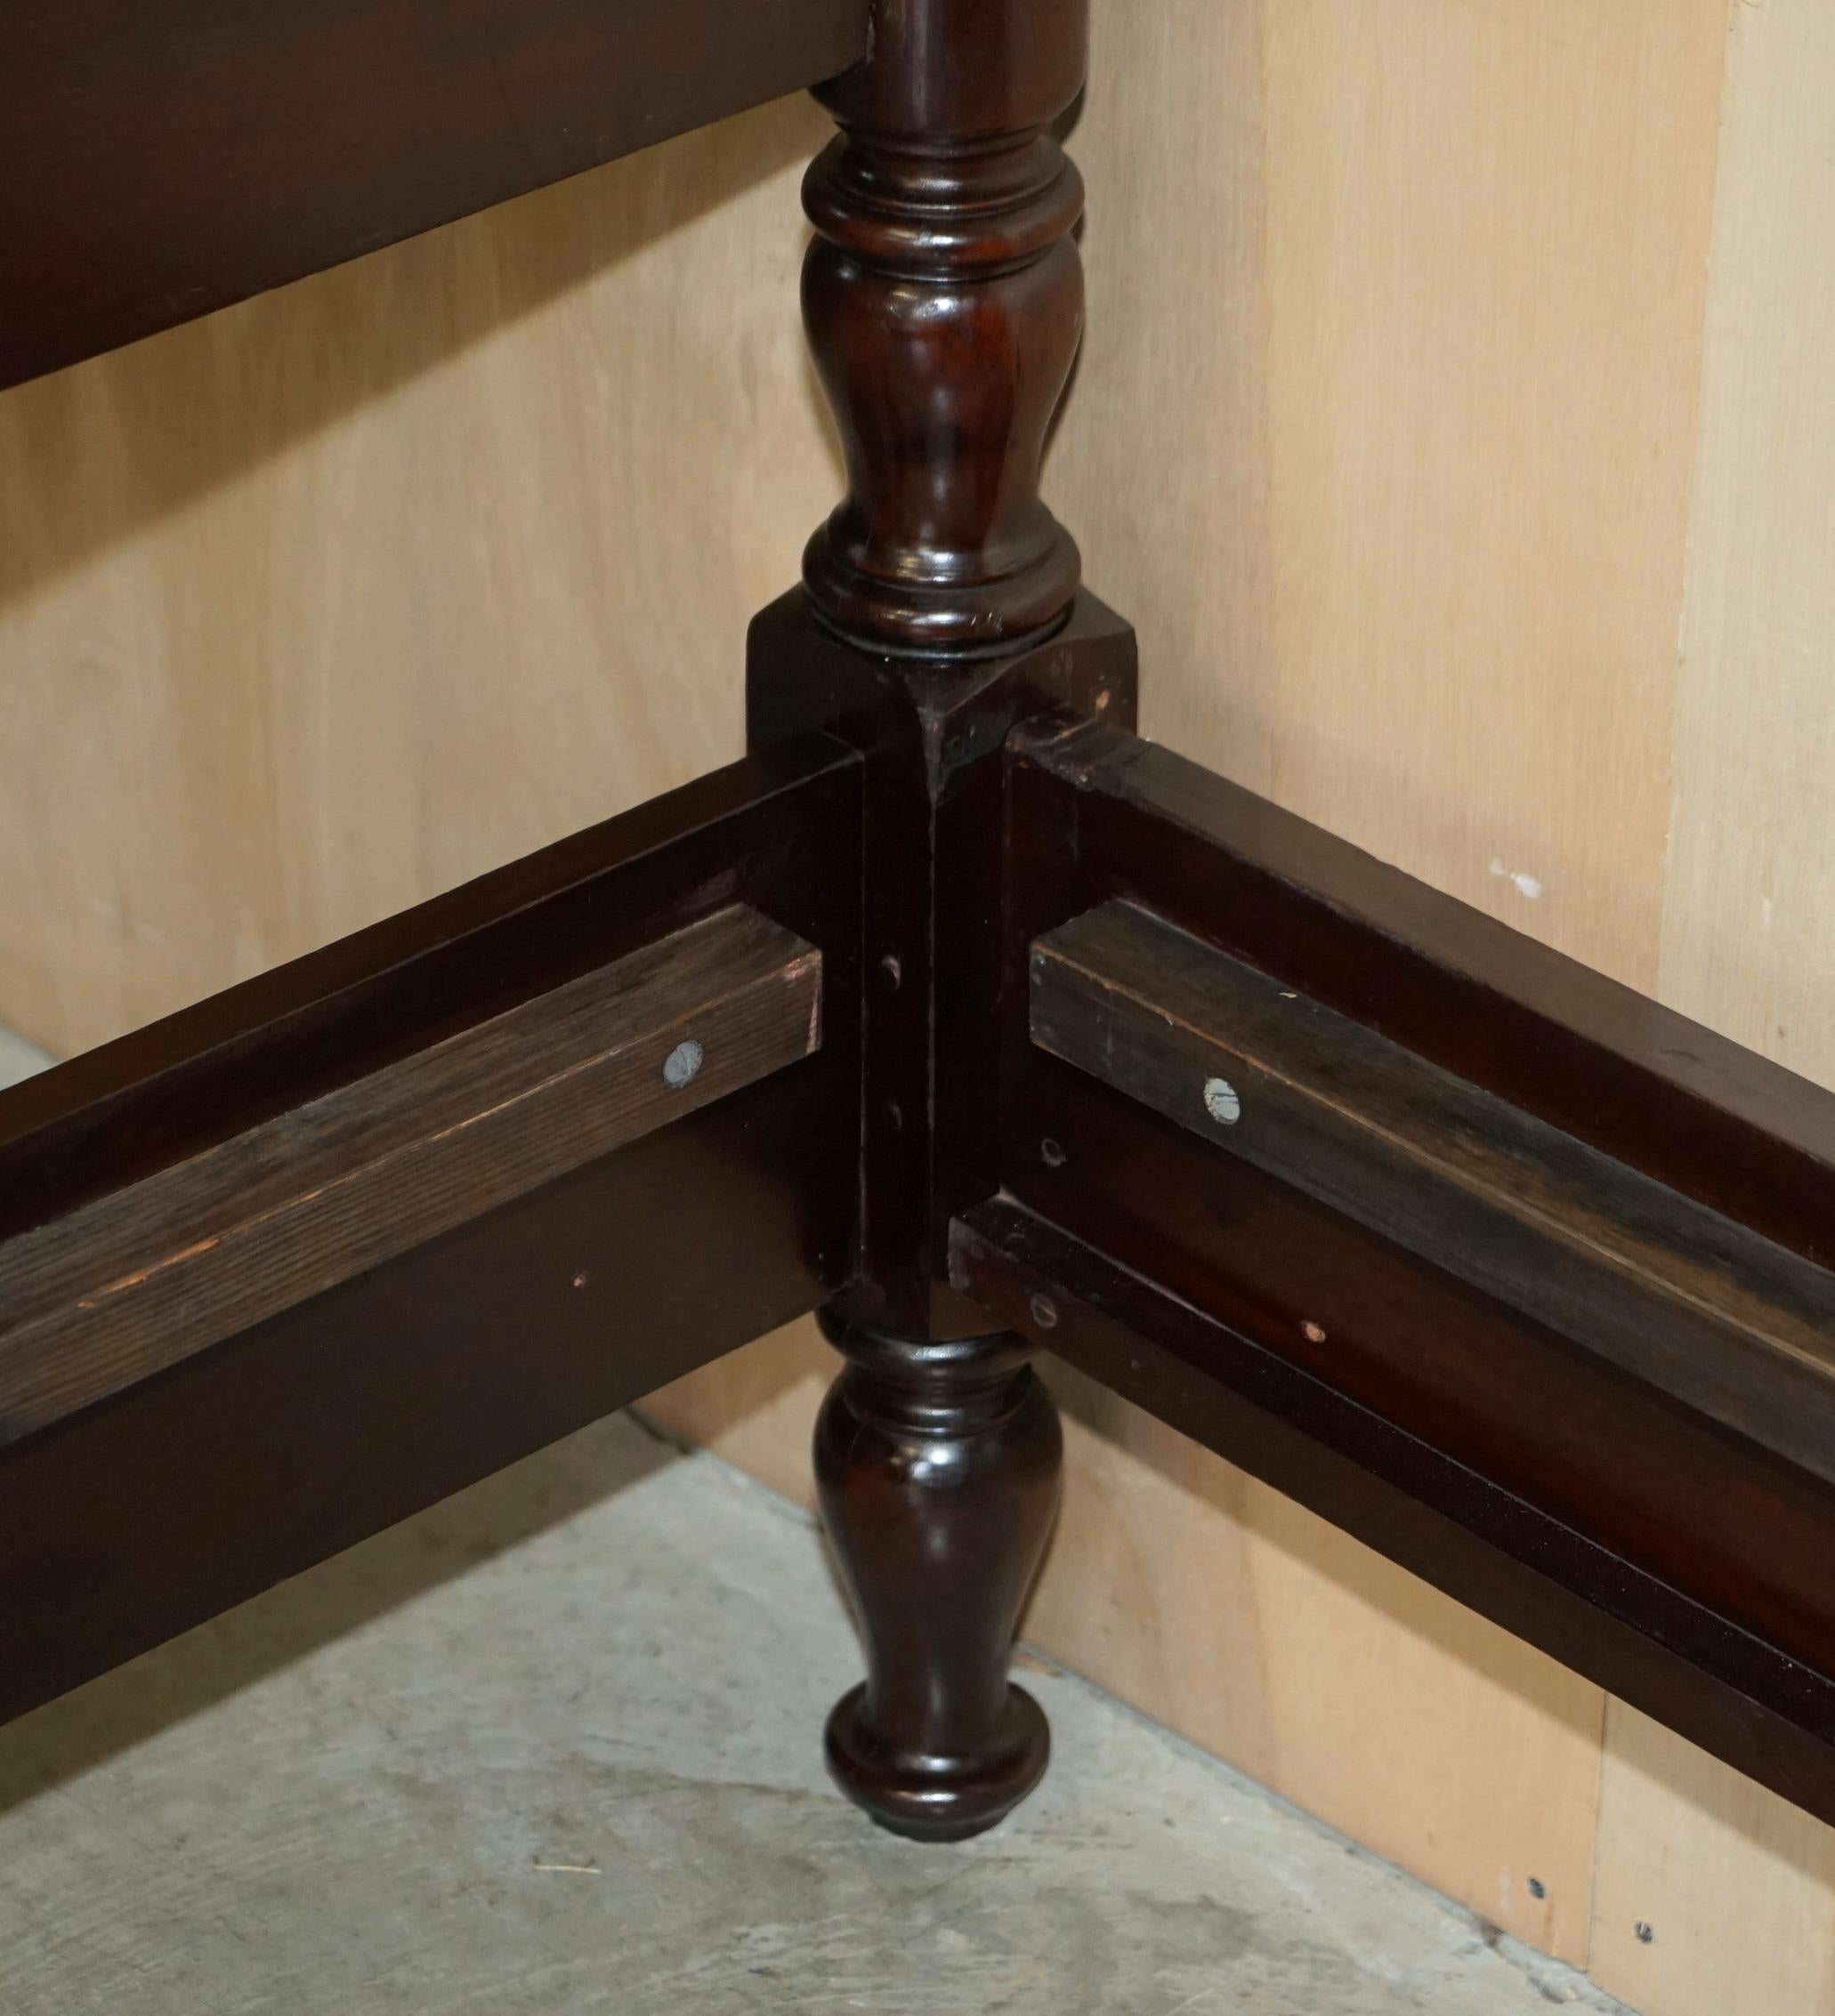 Circa 1800 American Federal Hardwood Four Poster Bed Frame with Carved Pillars For Sale 9